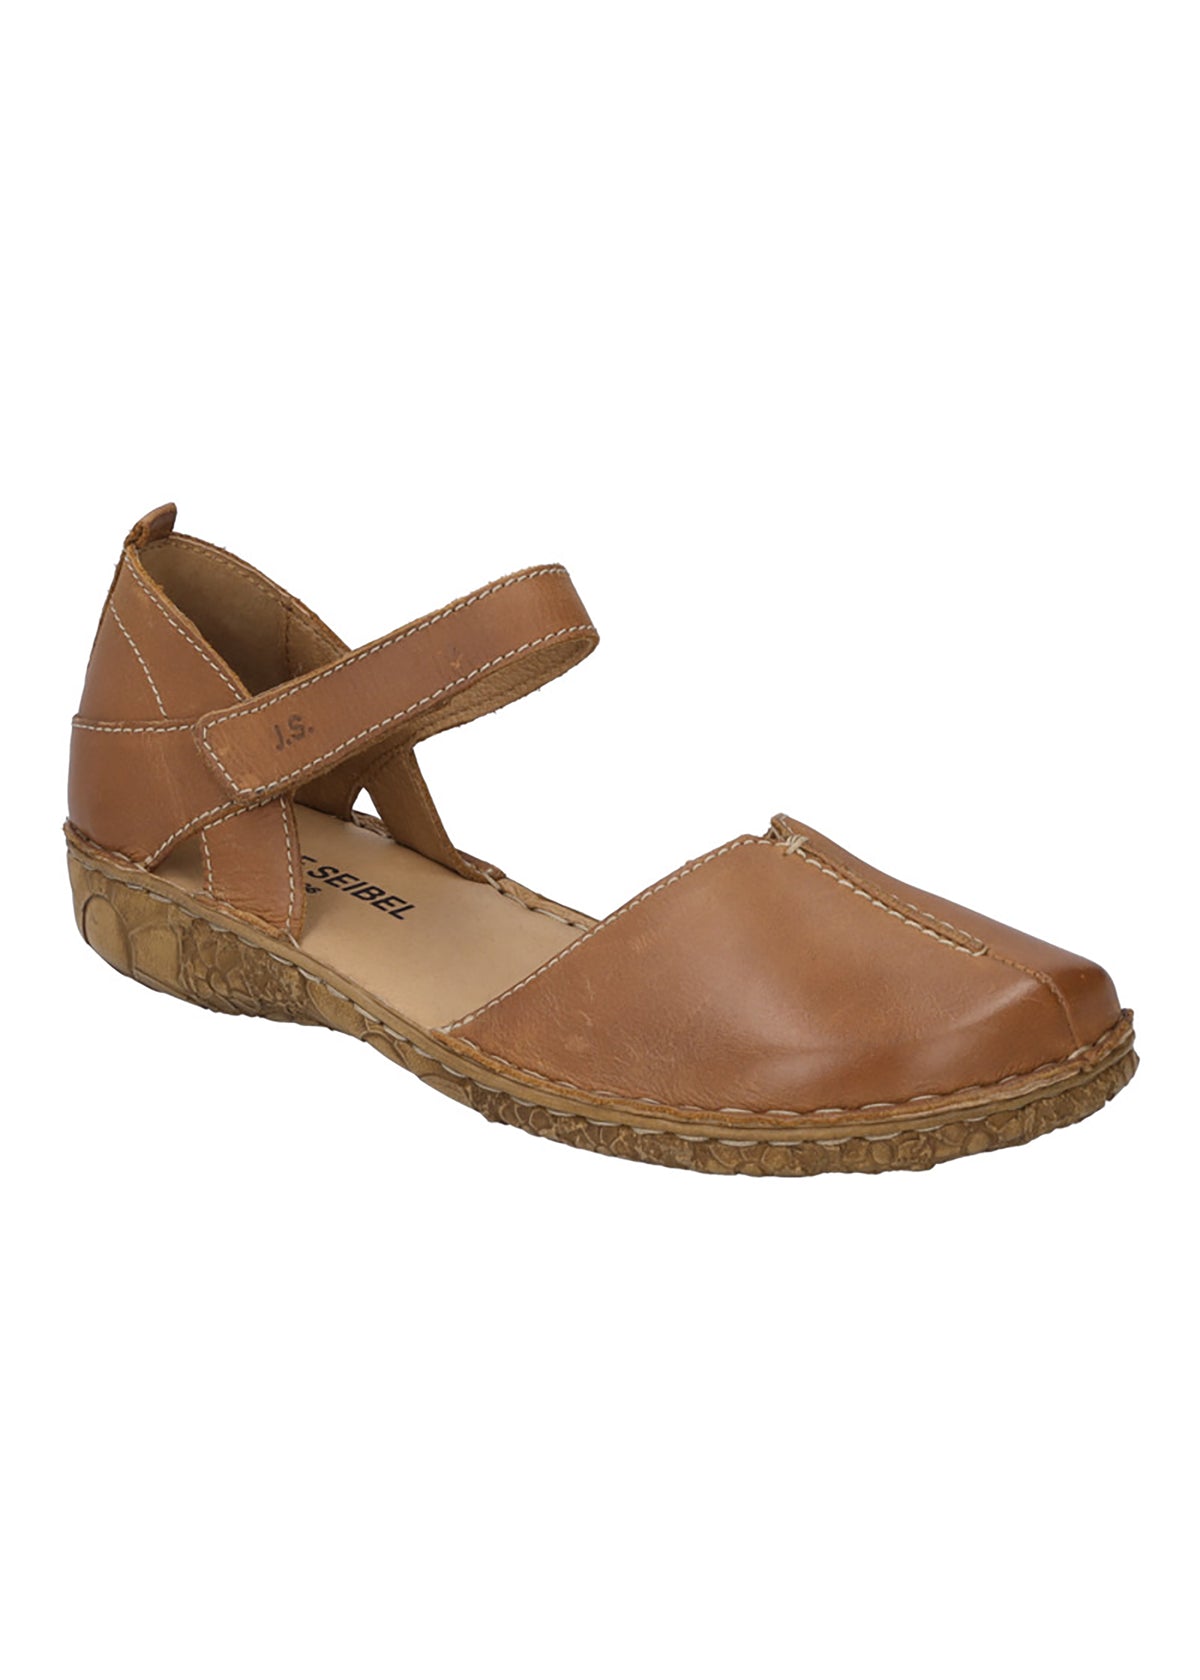 Closed toe sandals - brown leather, Rosalie 42